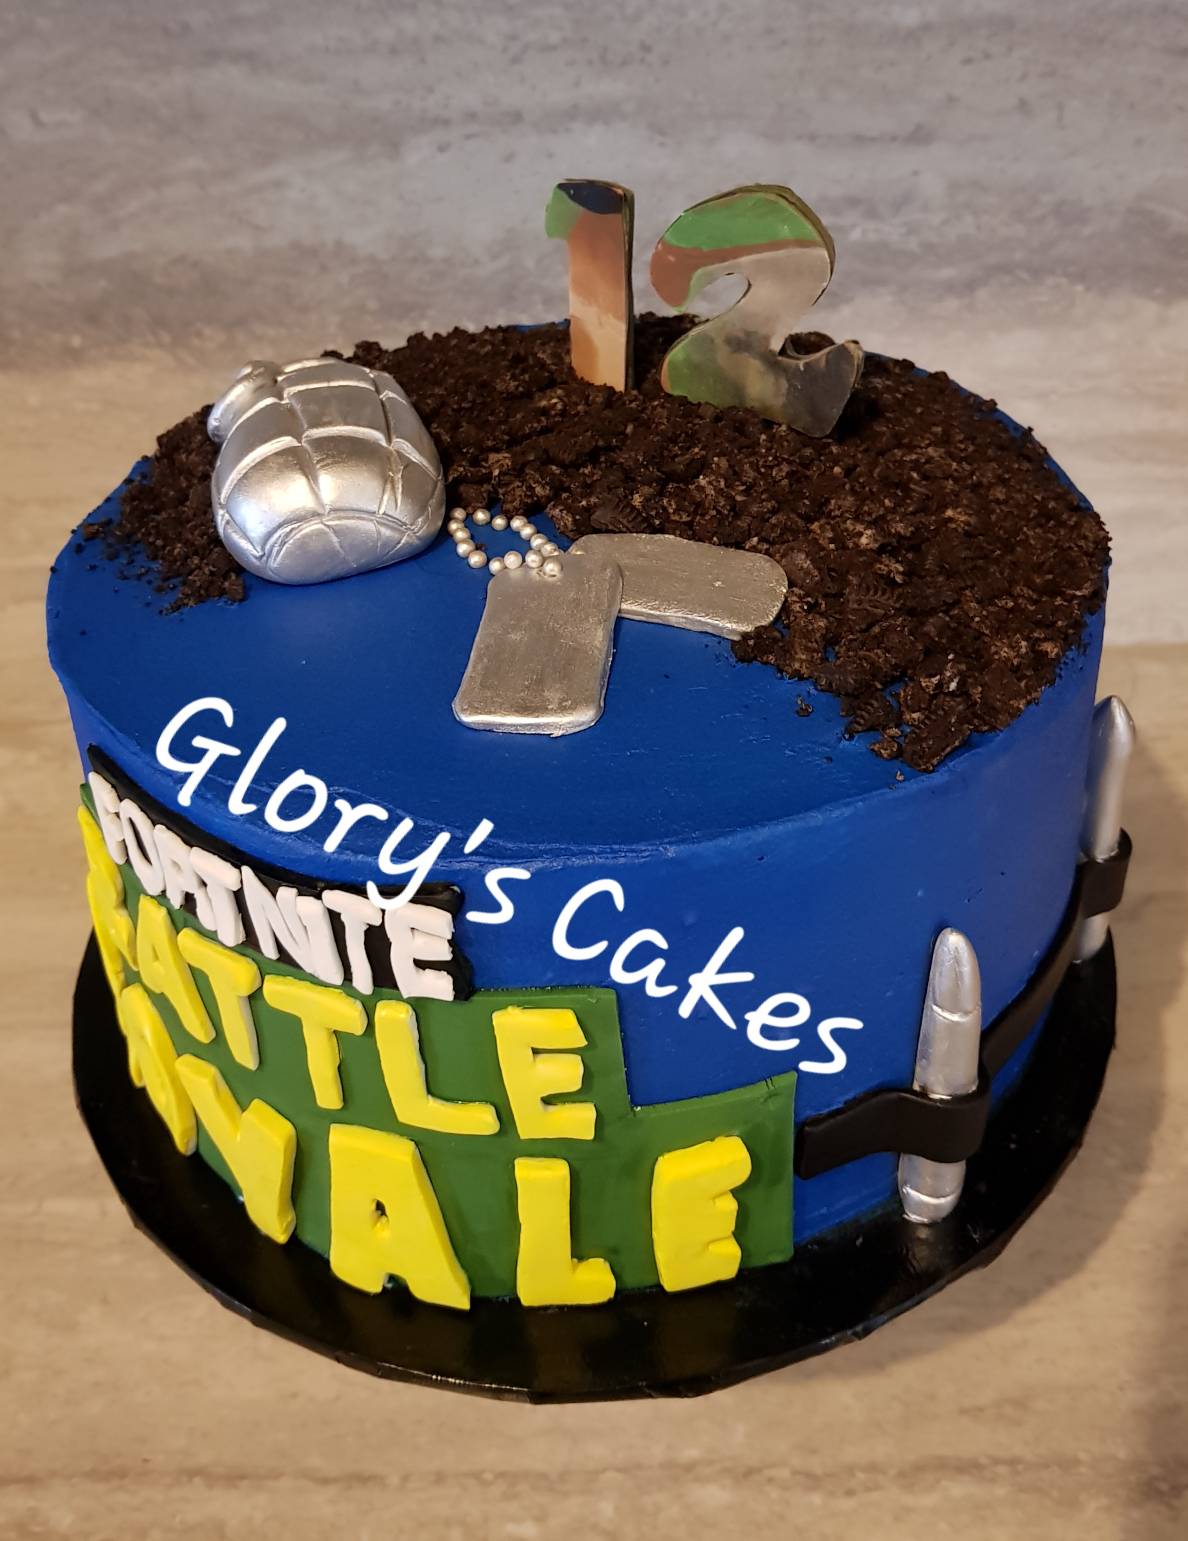 All Birthday Cakes in Fortnite - Cake Locations - Pro Game Guides